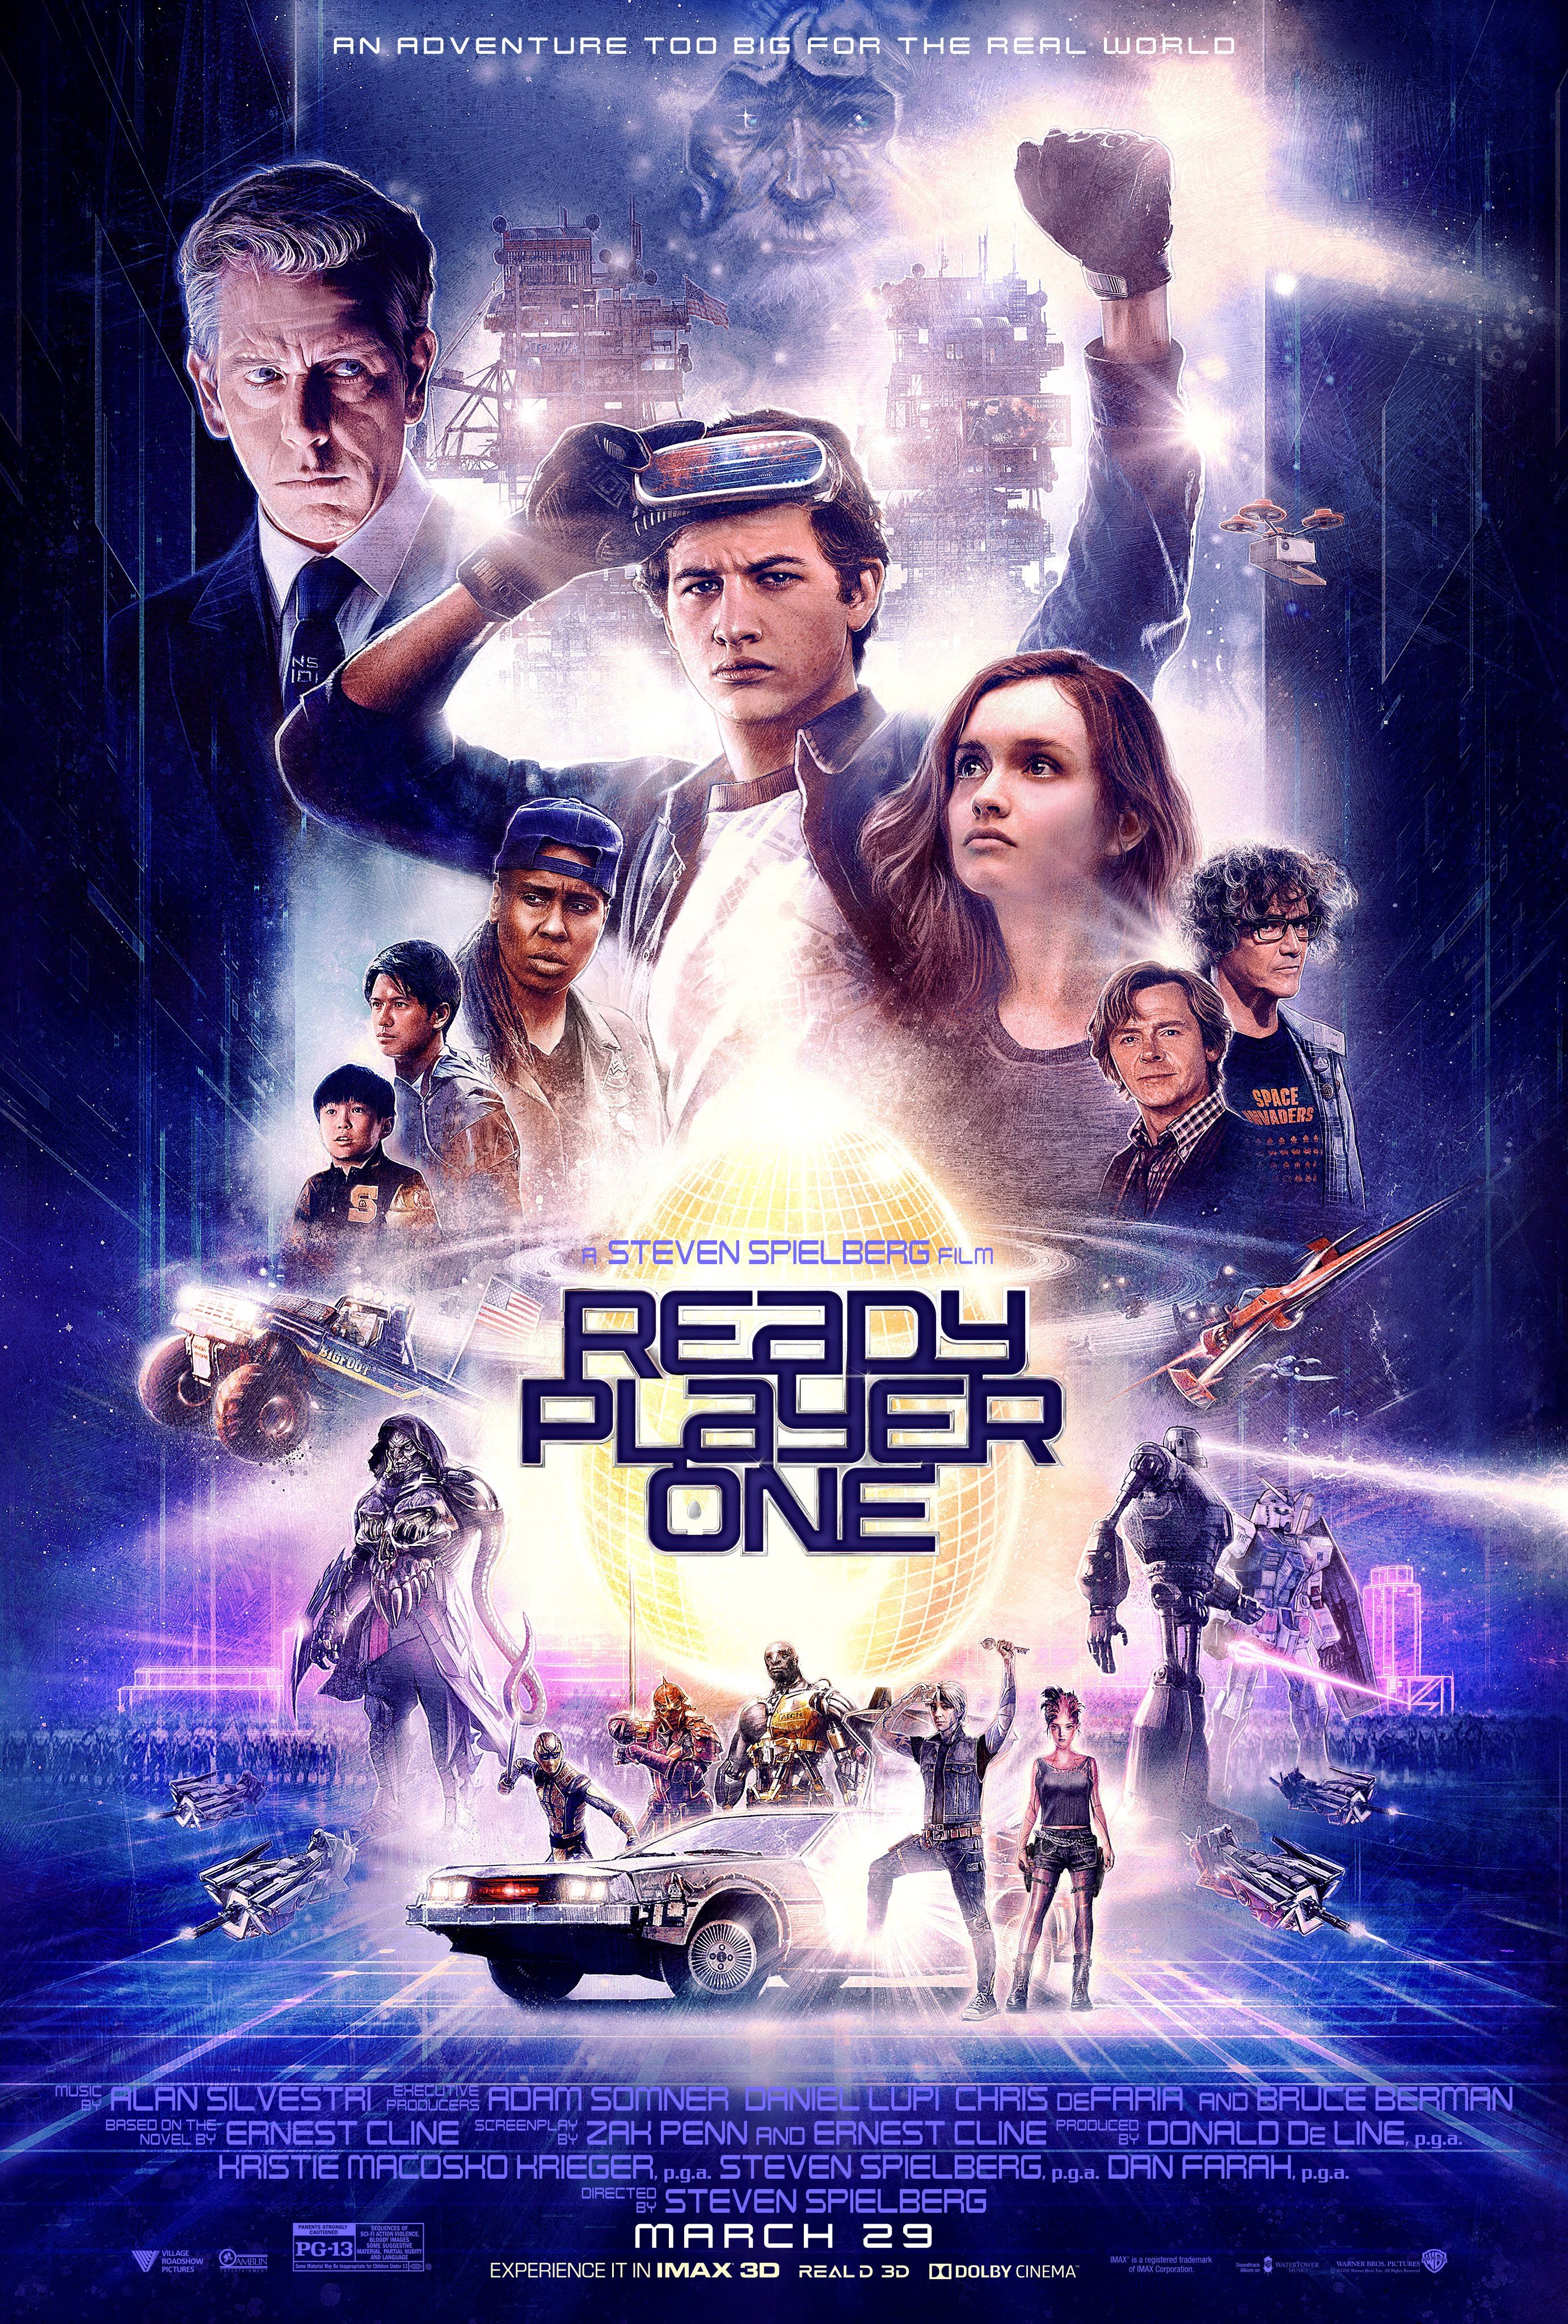 Ready Player One (film). The JH Movie Collection's Official